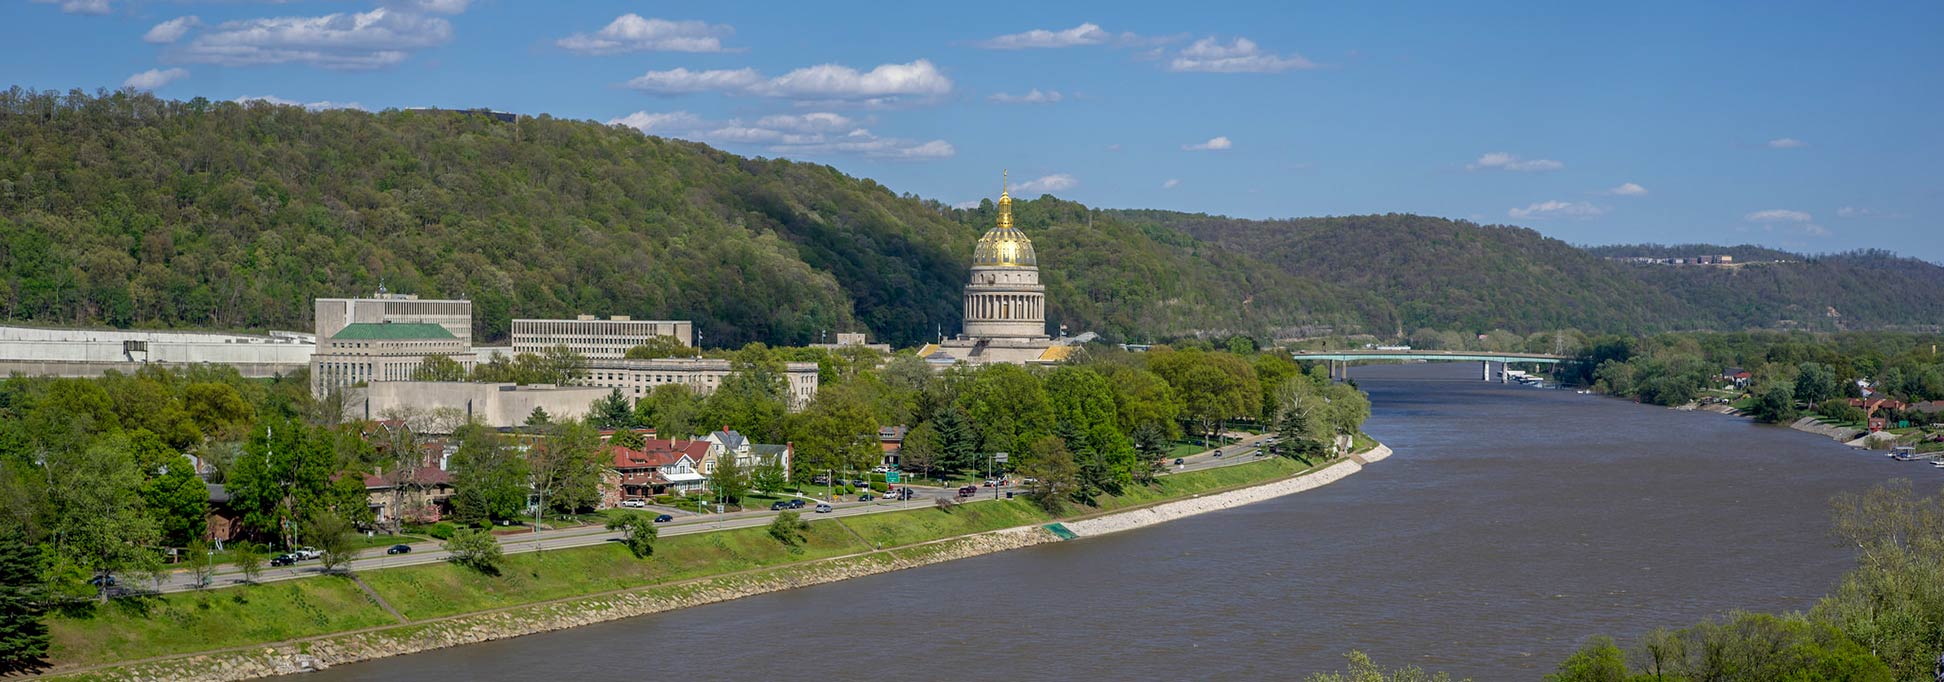 View of the City of Charleston at Kanawha River from Loudon Heights, West Virginia